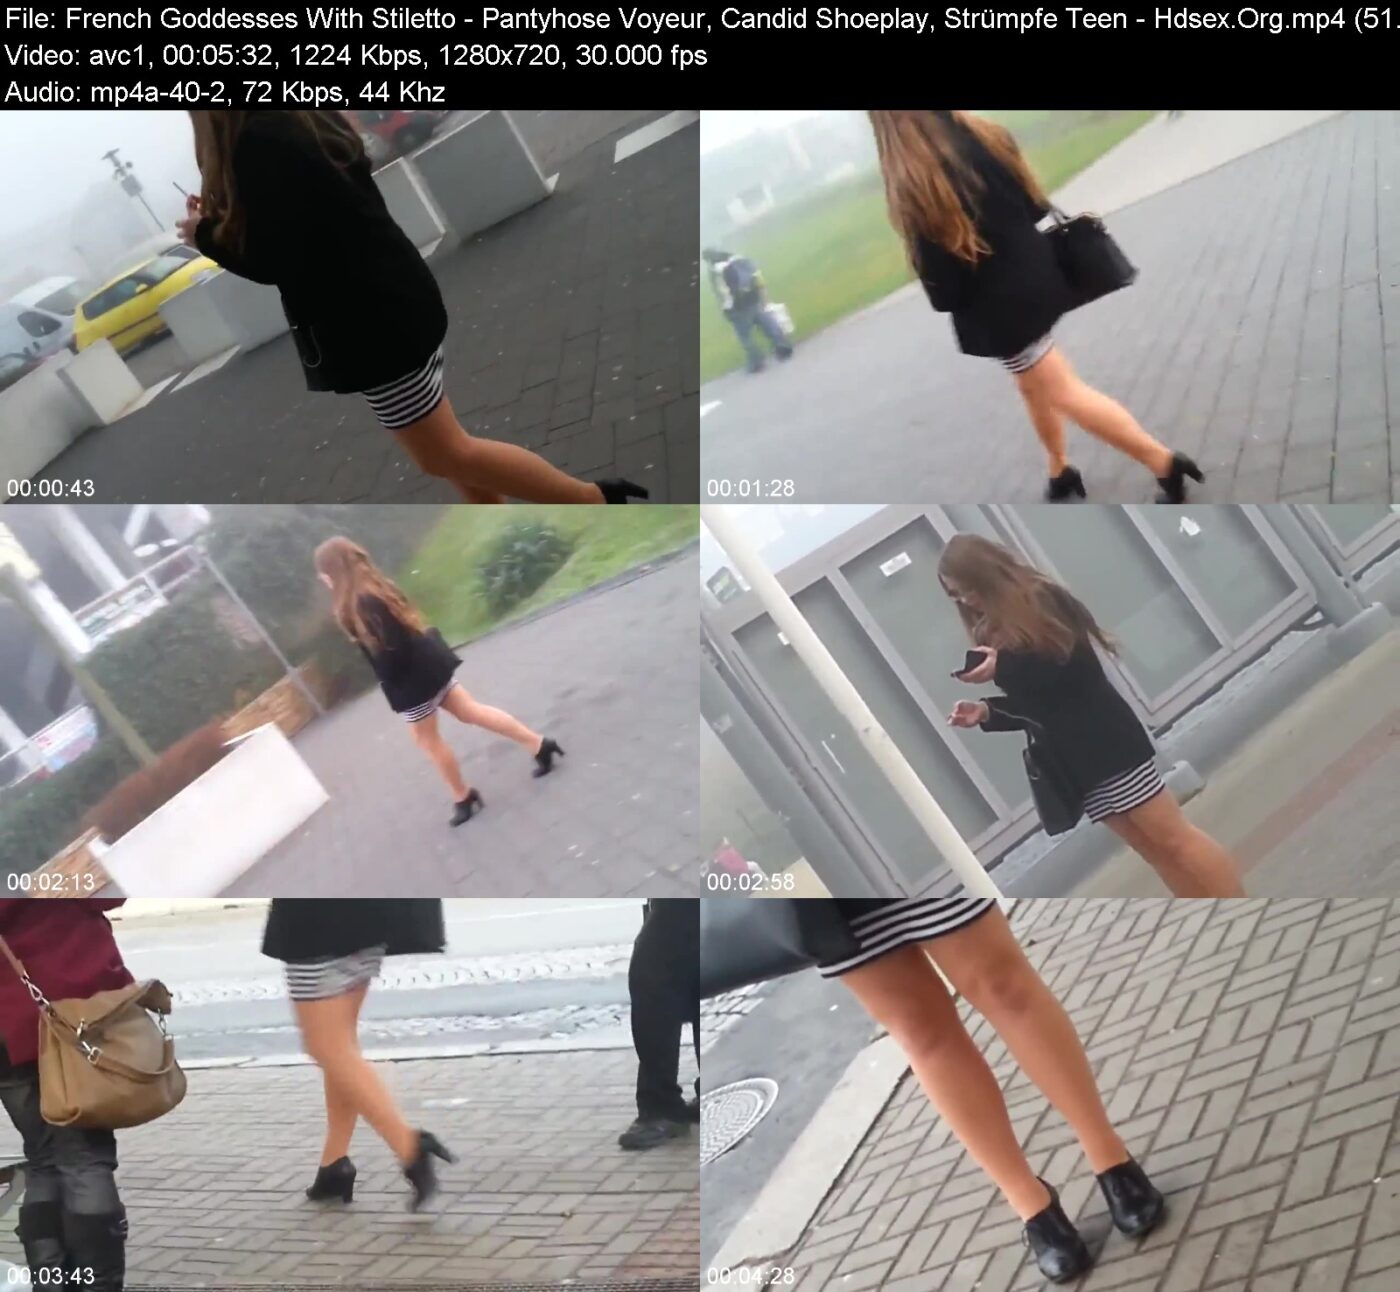 French Goddesses With Stiletto - Pantyhose Voyeur, Candid Shoeplay, Strümpfe Teen - Hdsex.Org